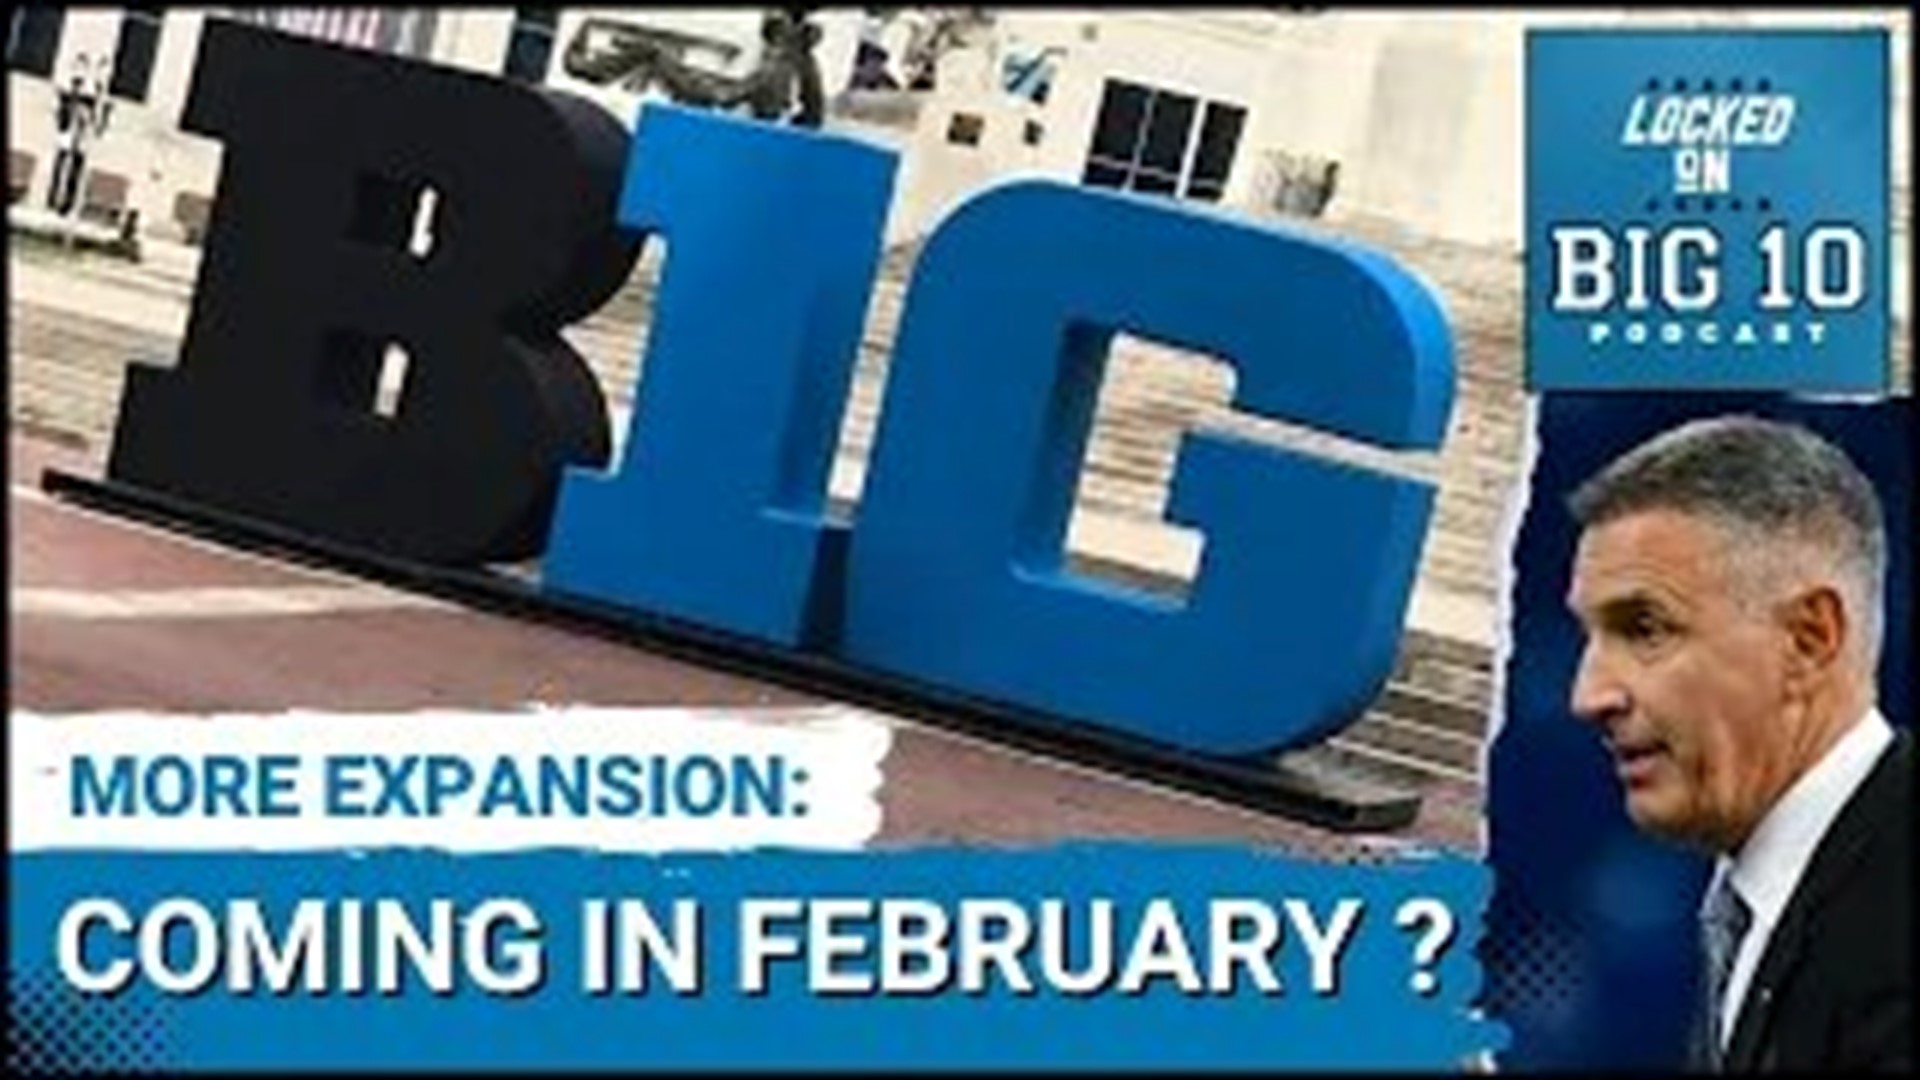 Just as the Big 10 expands to 18 teams, more schools could be coming with additional conference expansion as early February 2025.  That's in 11 months!